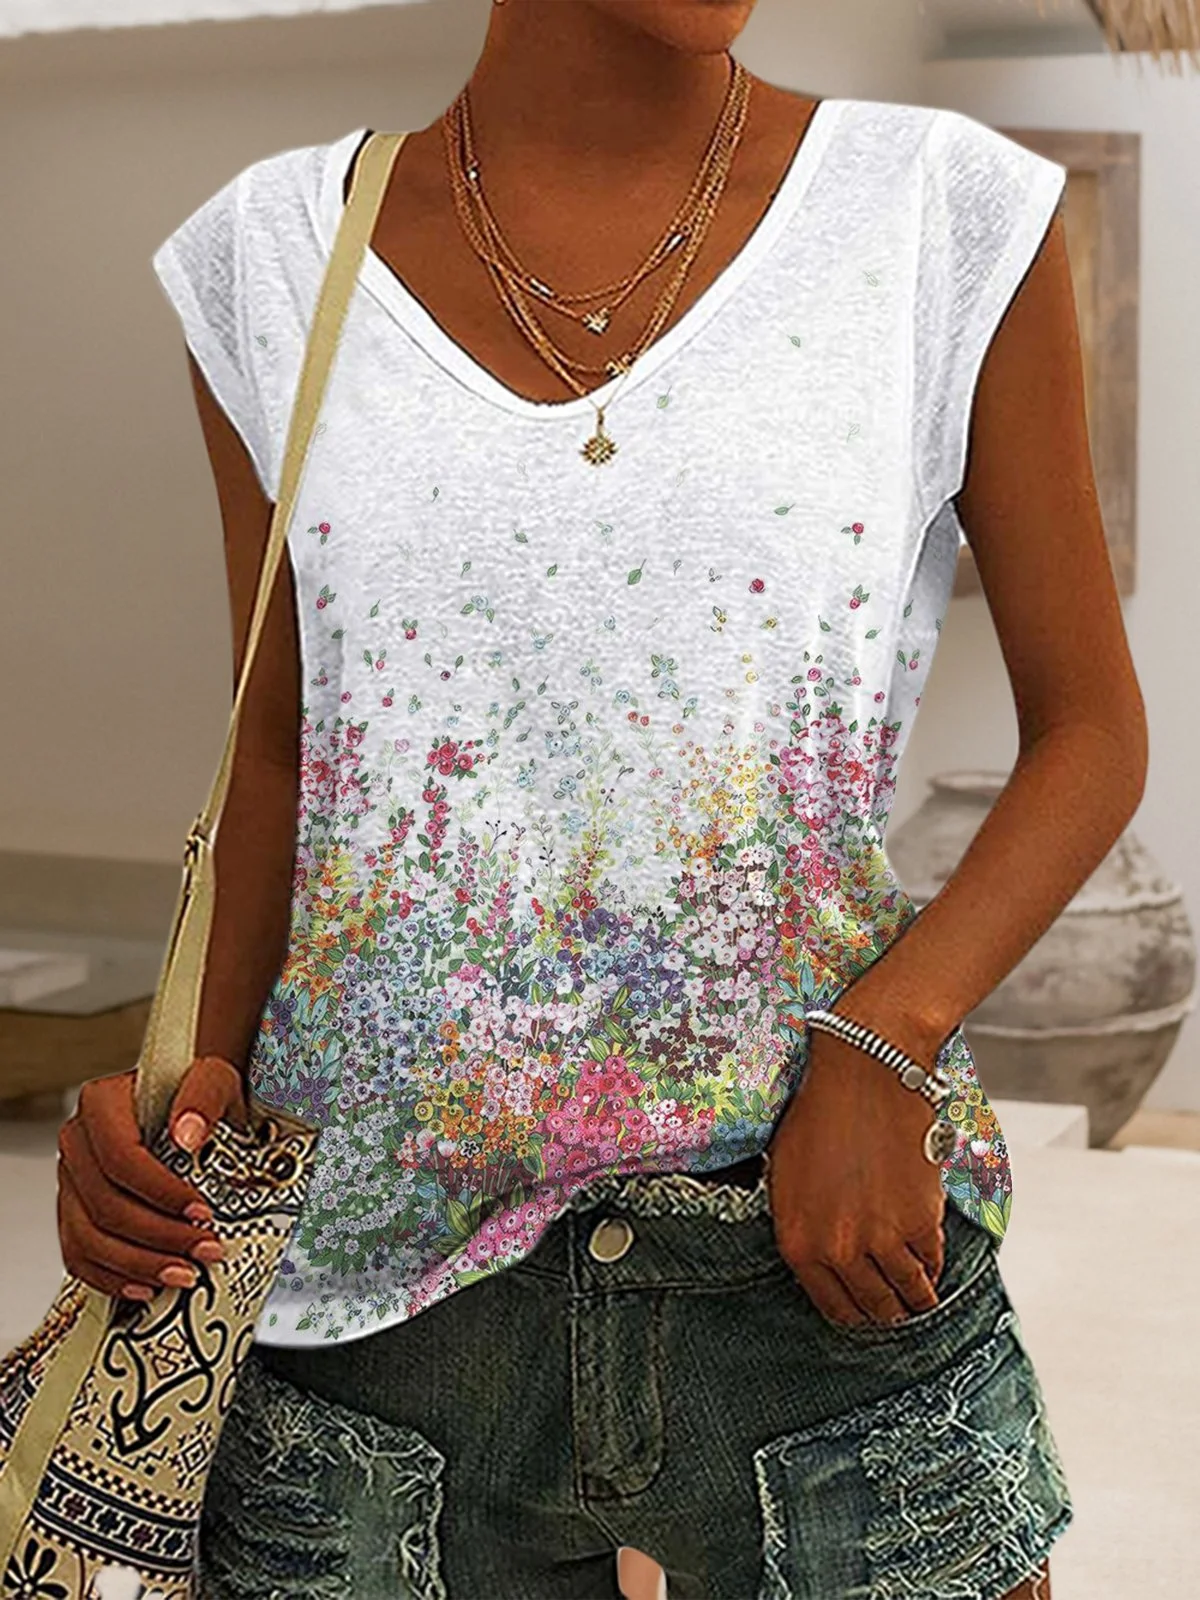 JFN Round Neck Floral Vacation T-Shirt/Tee